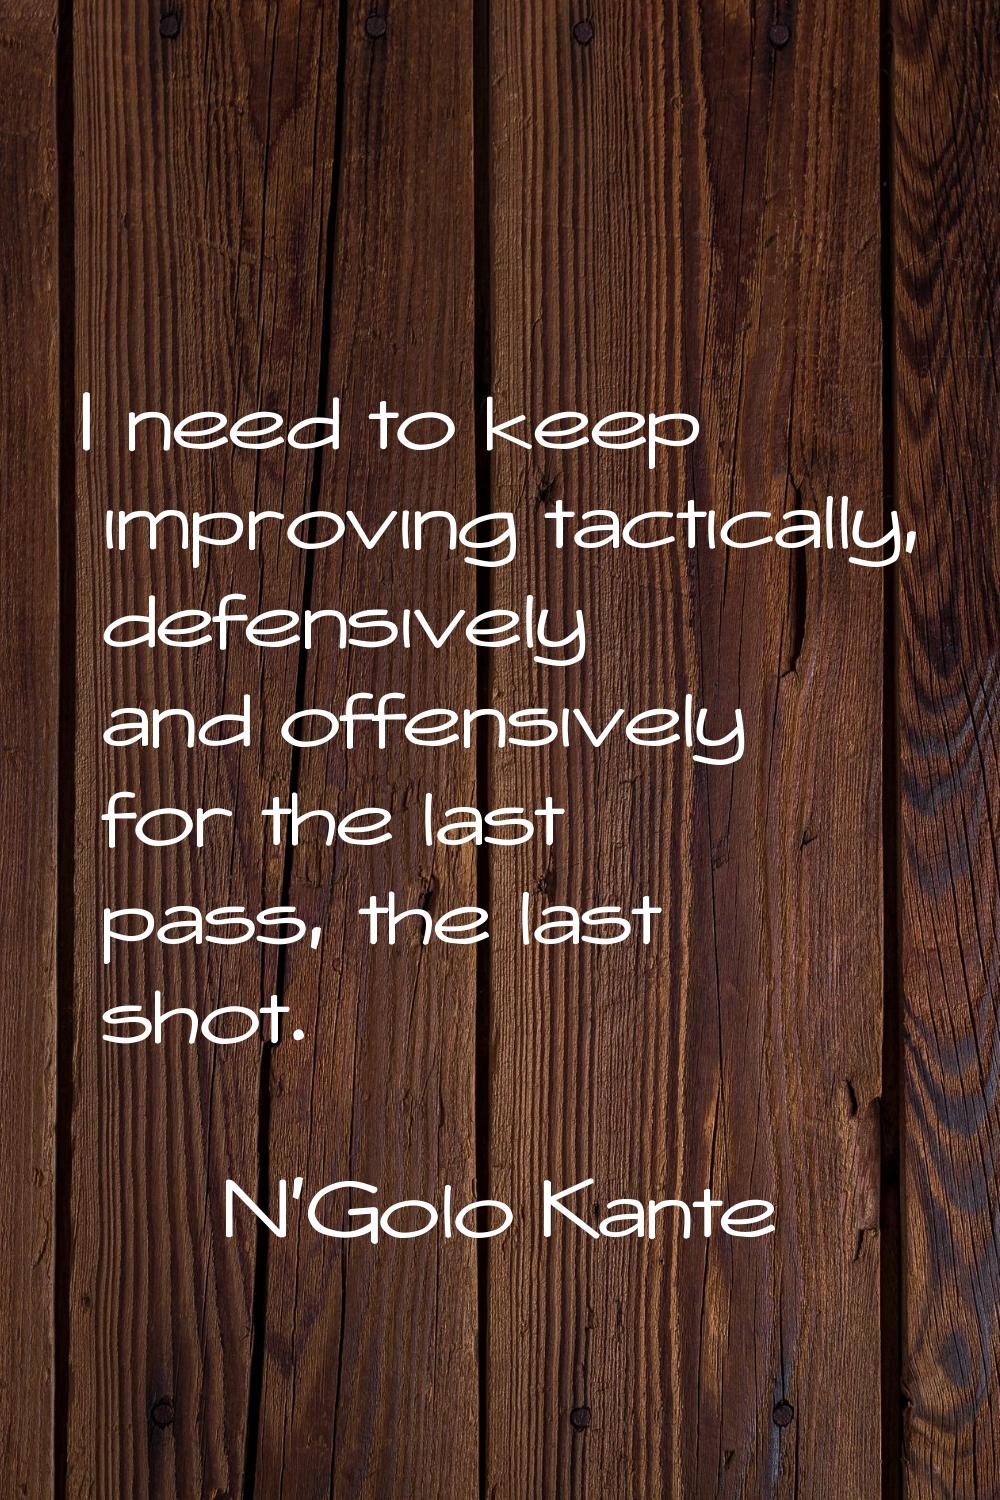 I need to keep improving tactically, defensively and offensively for the last pass, the last shot.